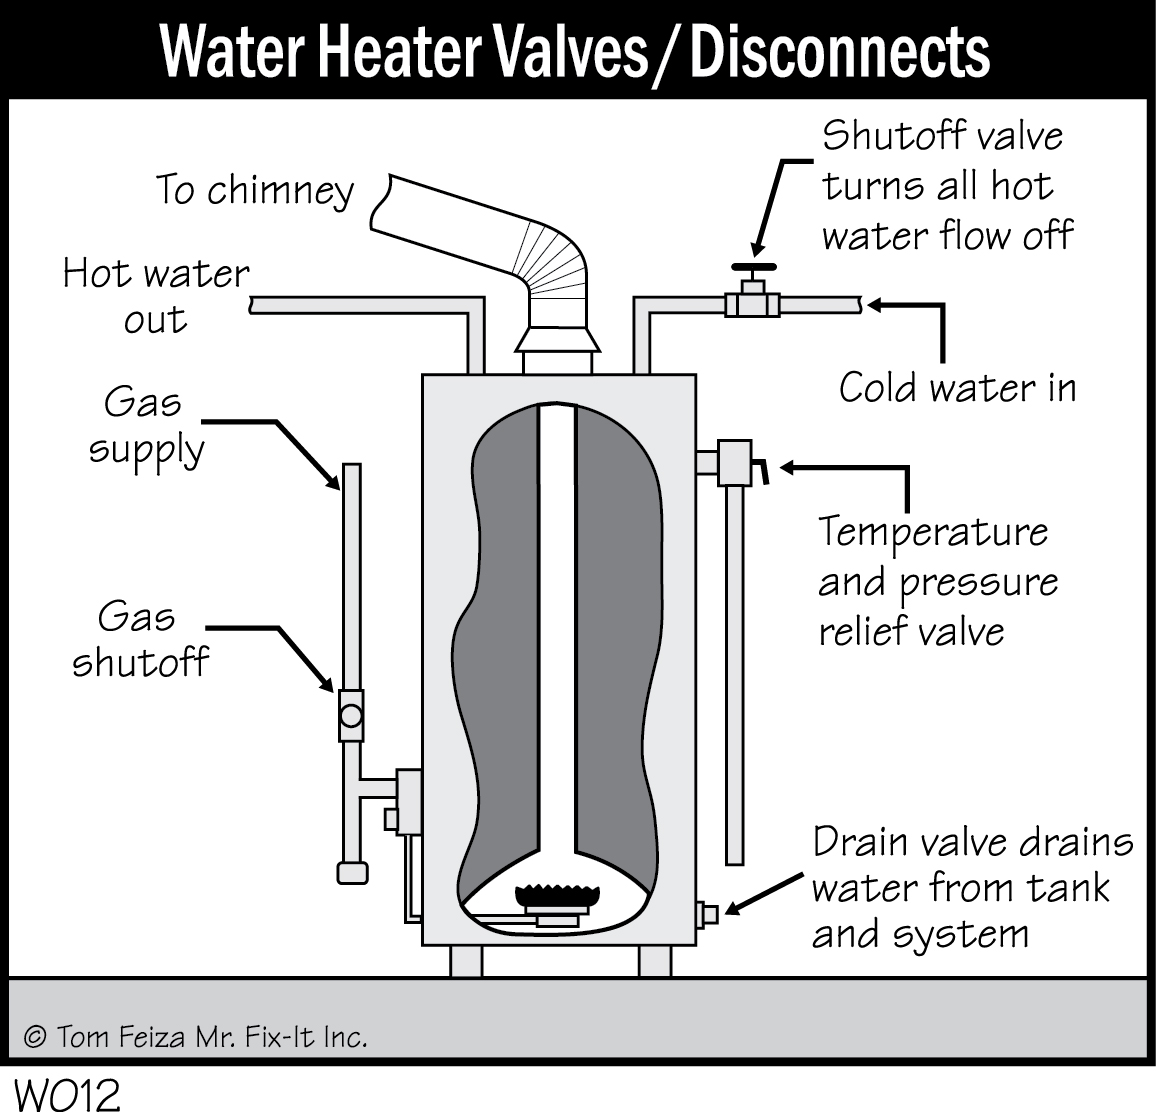 W012 - Water Heater Valves_Disconnects